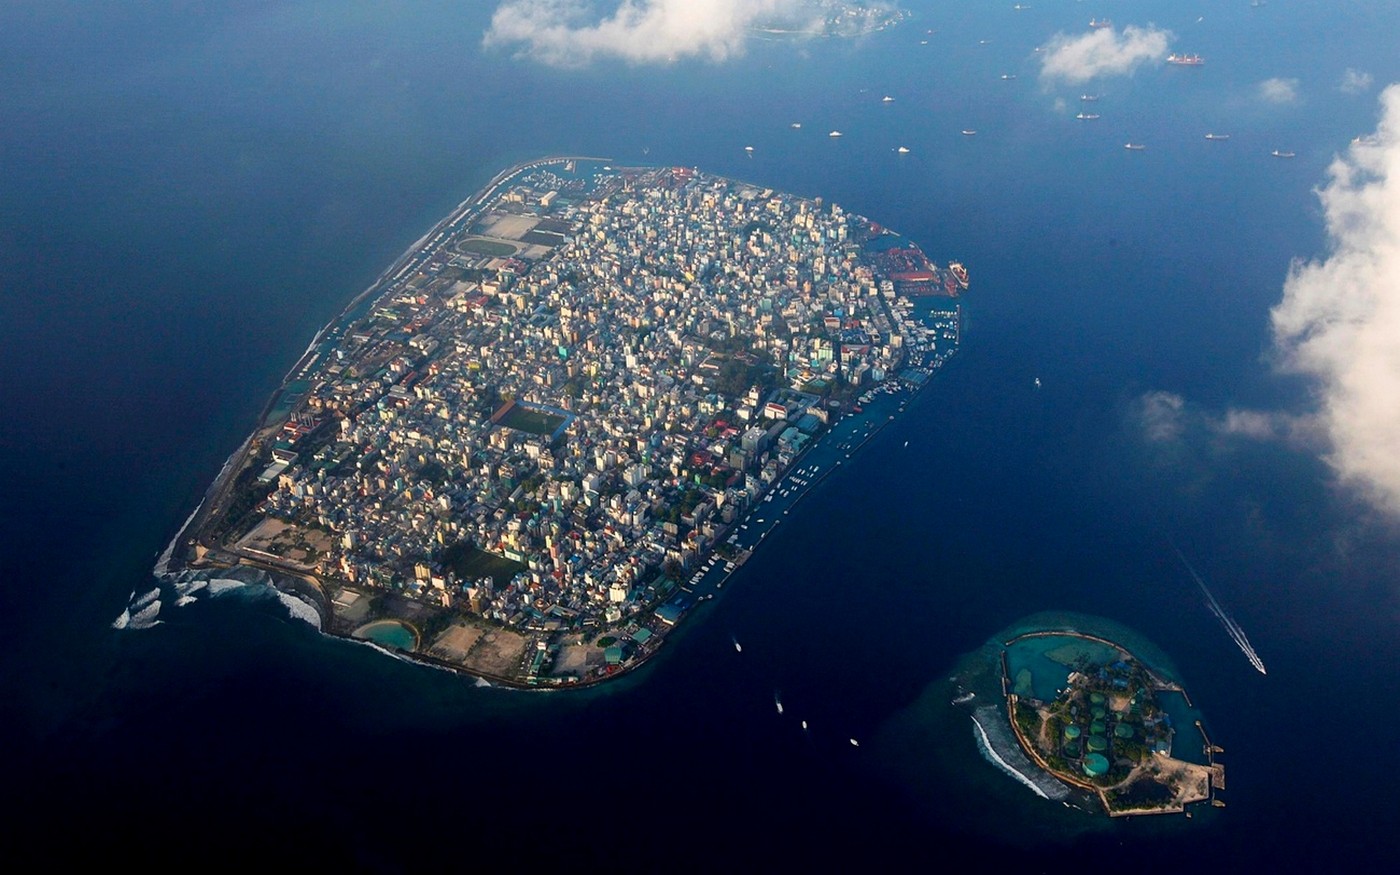 General 1400x875 landscape photography nature island aerial view sea clouds Maldives city